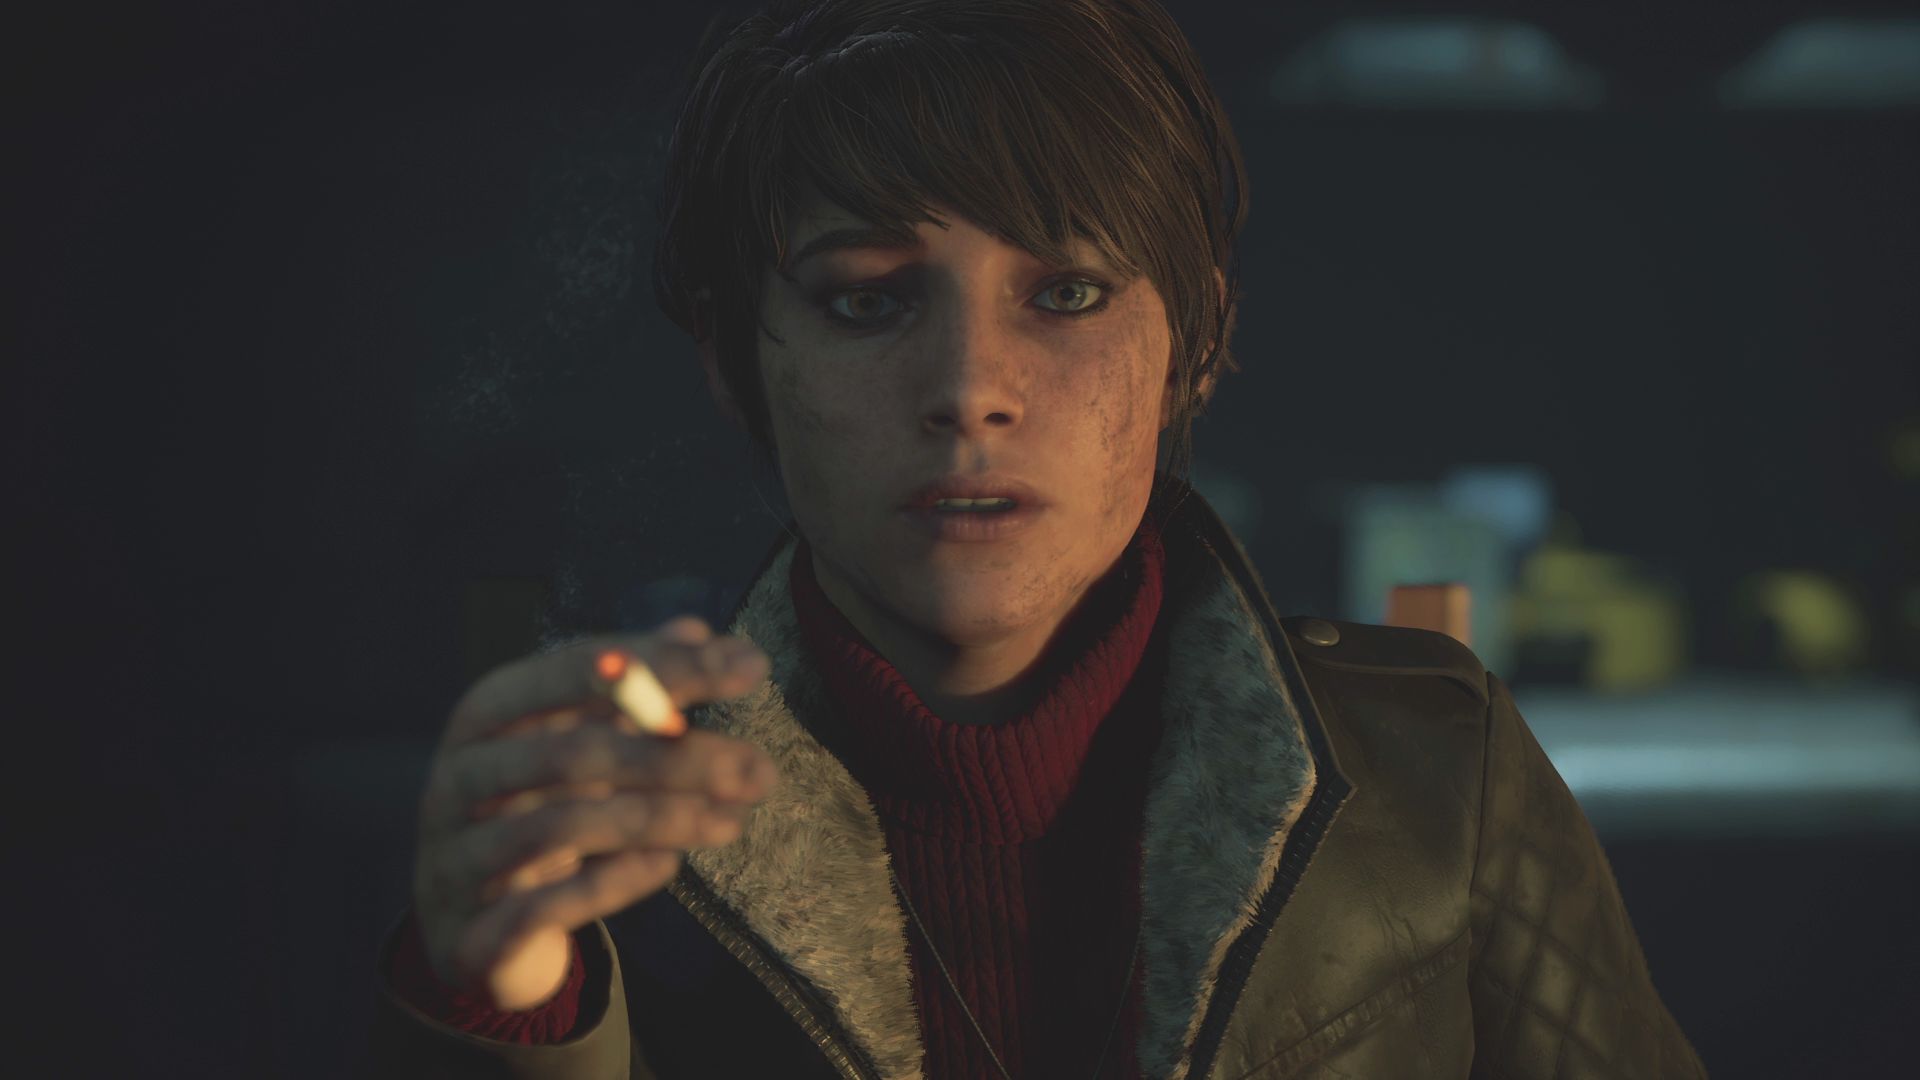 A screenshot of Mariane, the medium from The Medium. She's a young white woman with short dark hair, and is smoking a cigarette and covered in dirt.